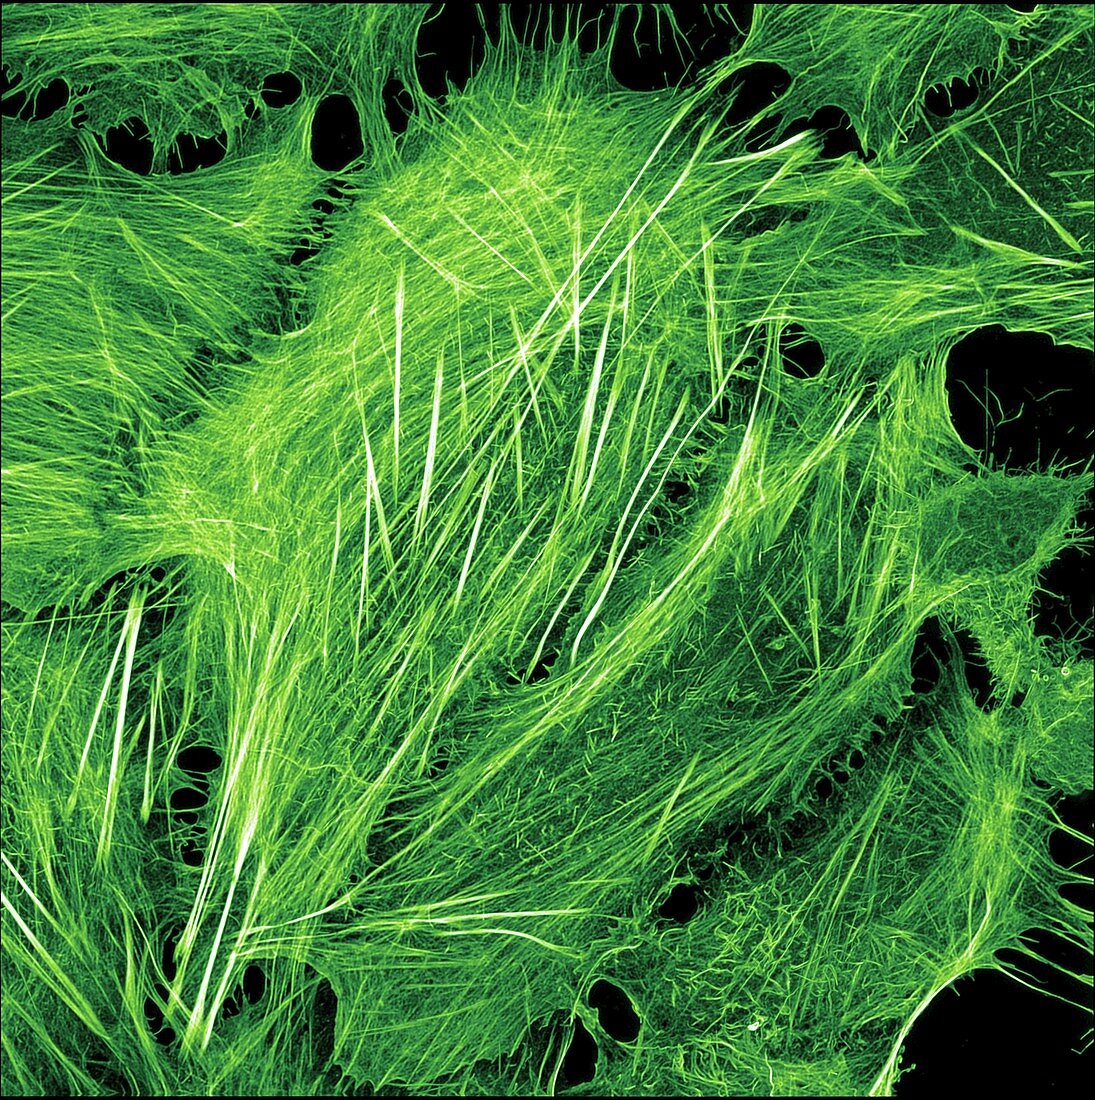 Bone cancer cell showing cytoskeleton, light micrograph